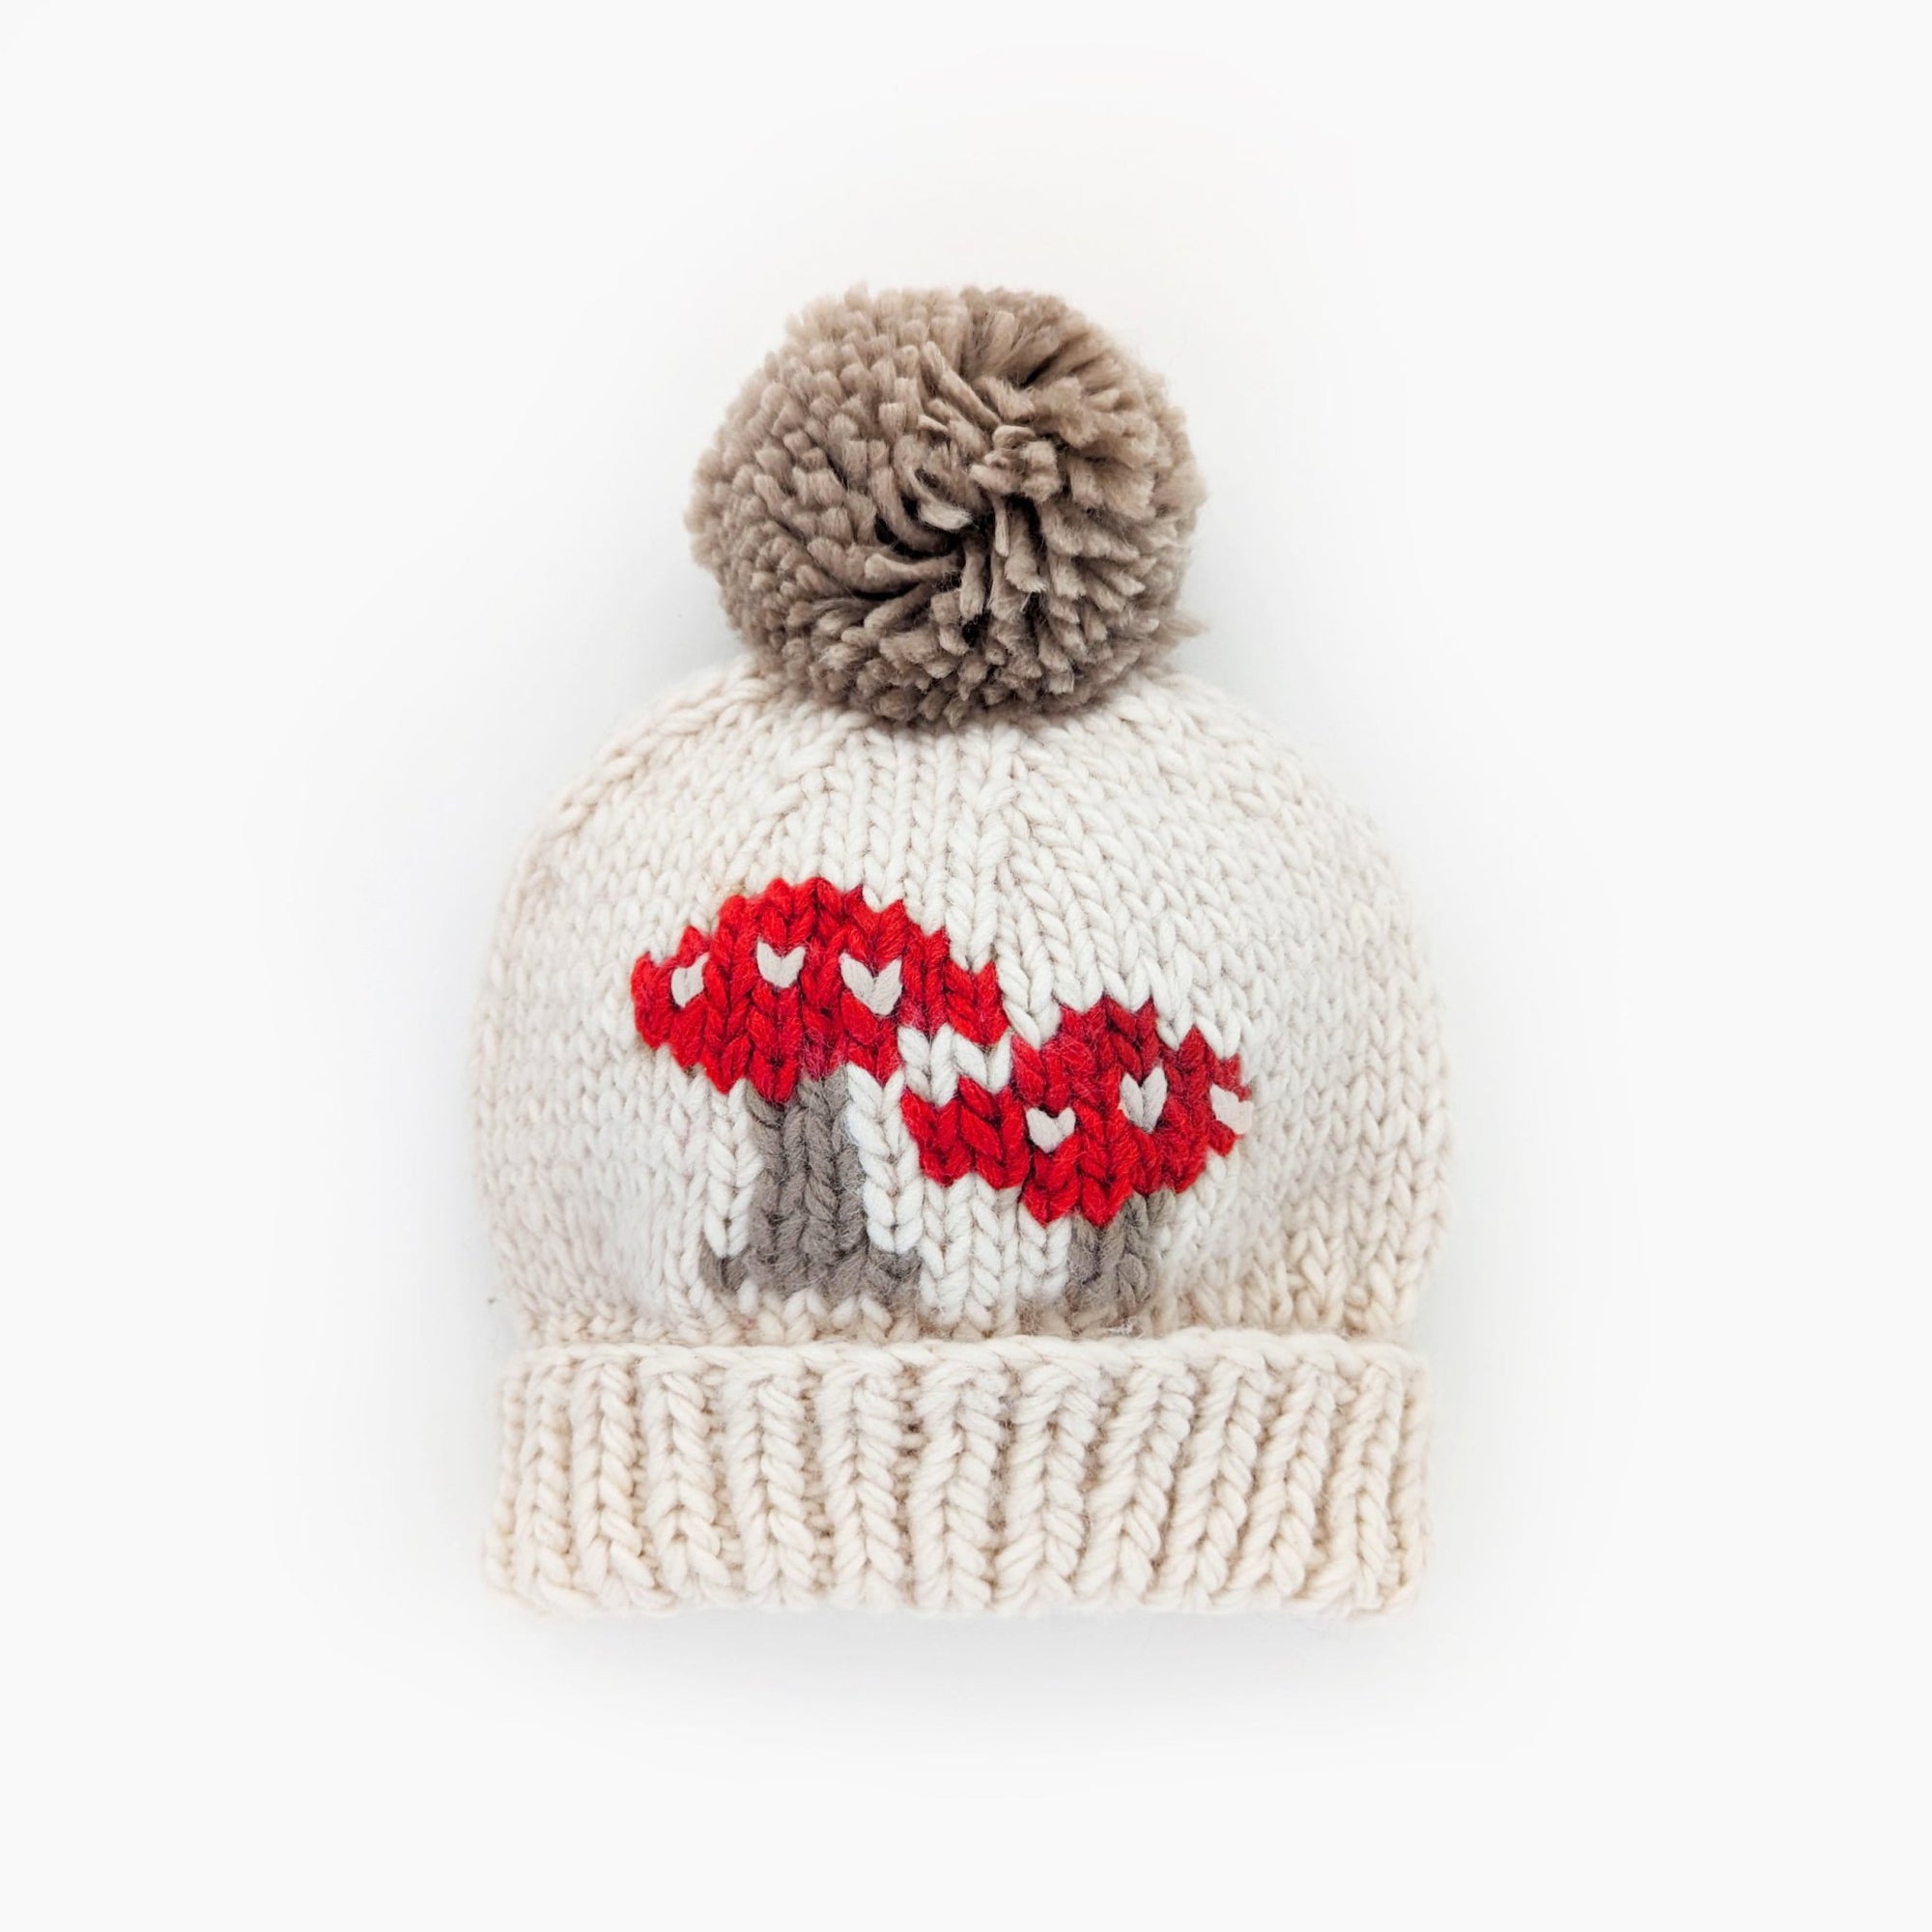 Mushroom Natural Beanie Hat for Baby, Kids & Adults - Beanie Hats